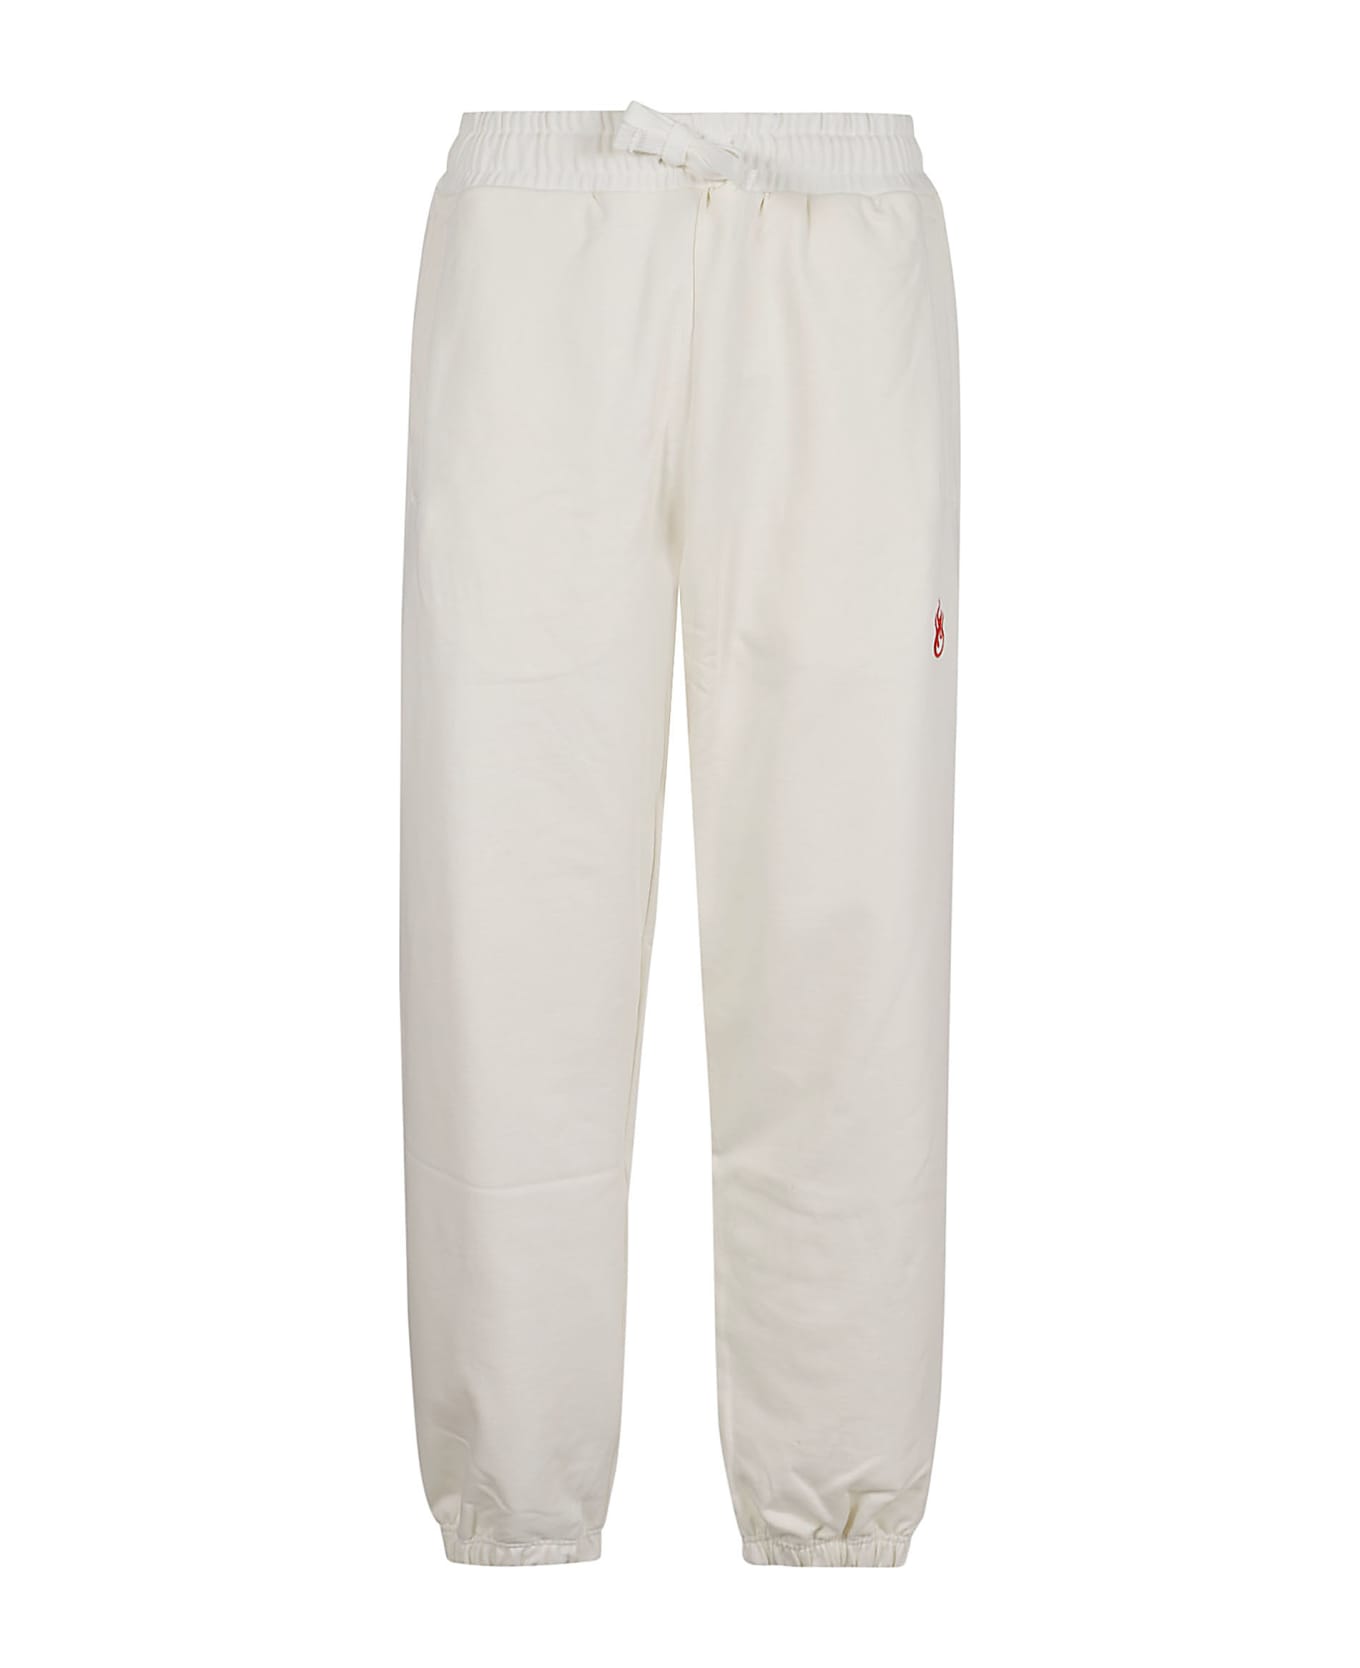 Vision of Super White Pants With Flames Logo And Metal Label - White